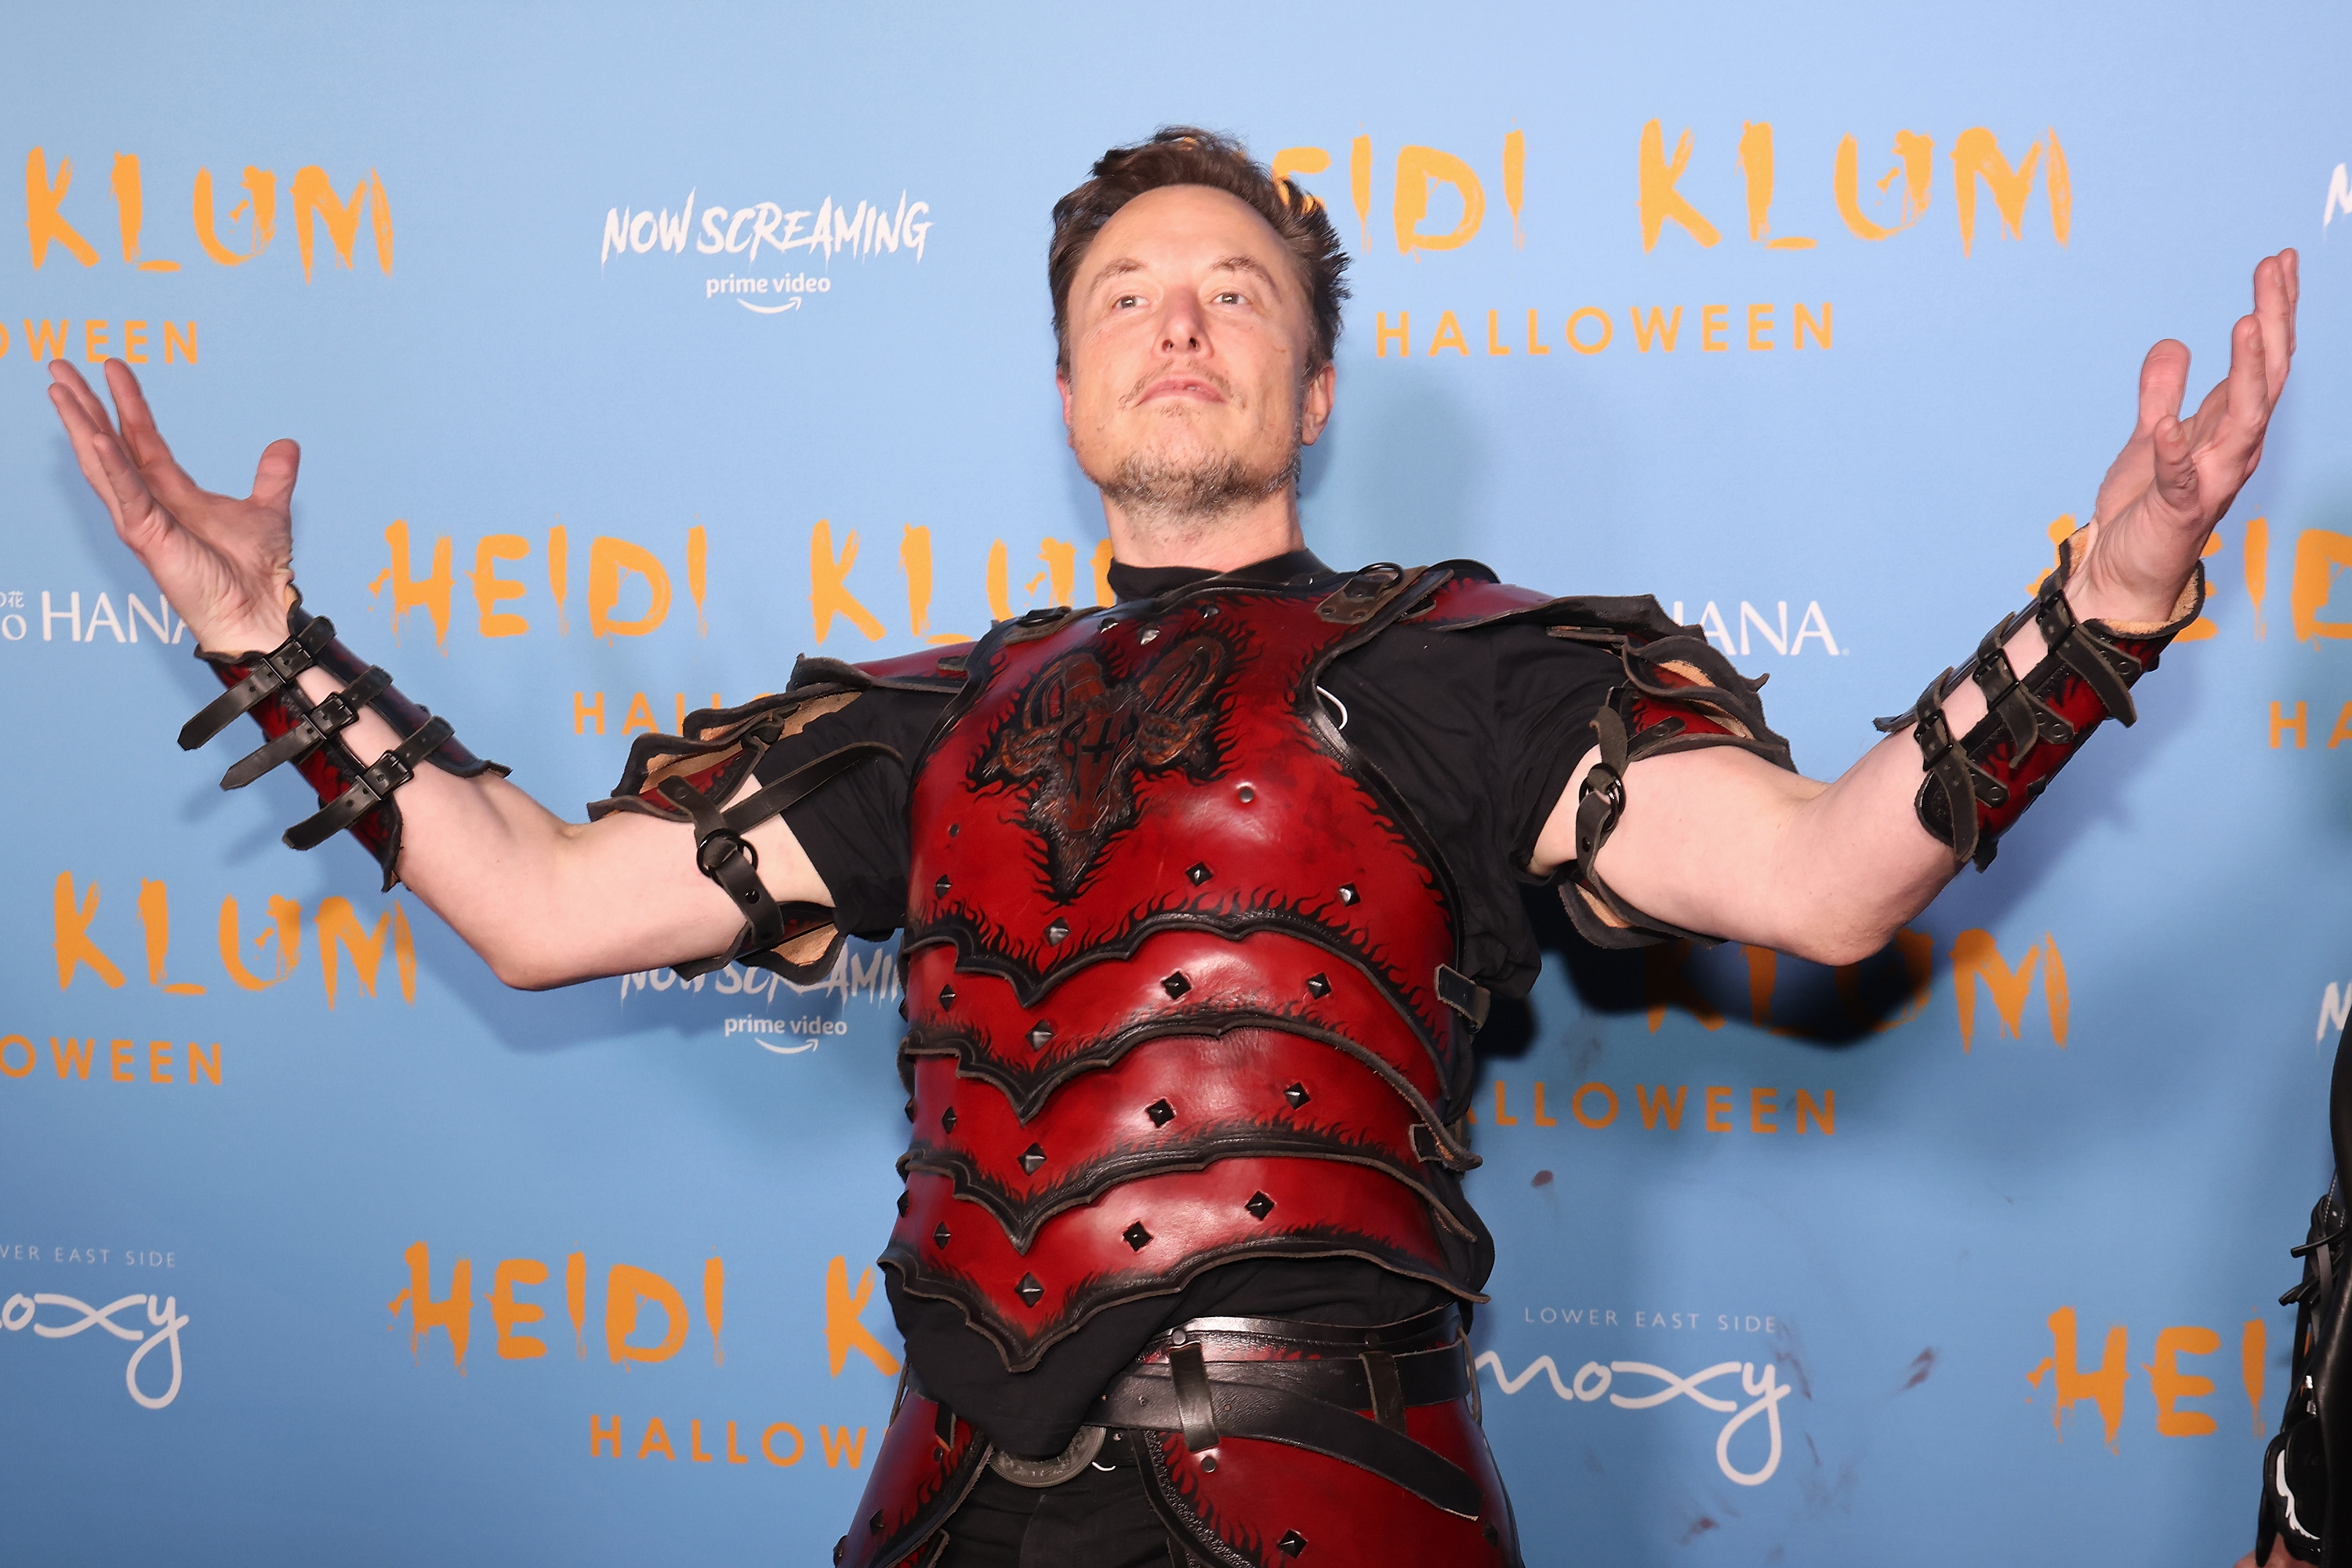 Elon Musk dressed in a gladiator-style costume, holding his arms up and out in a “look at me” gesture.